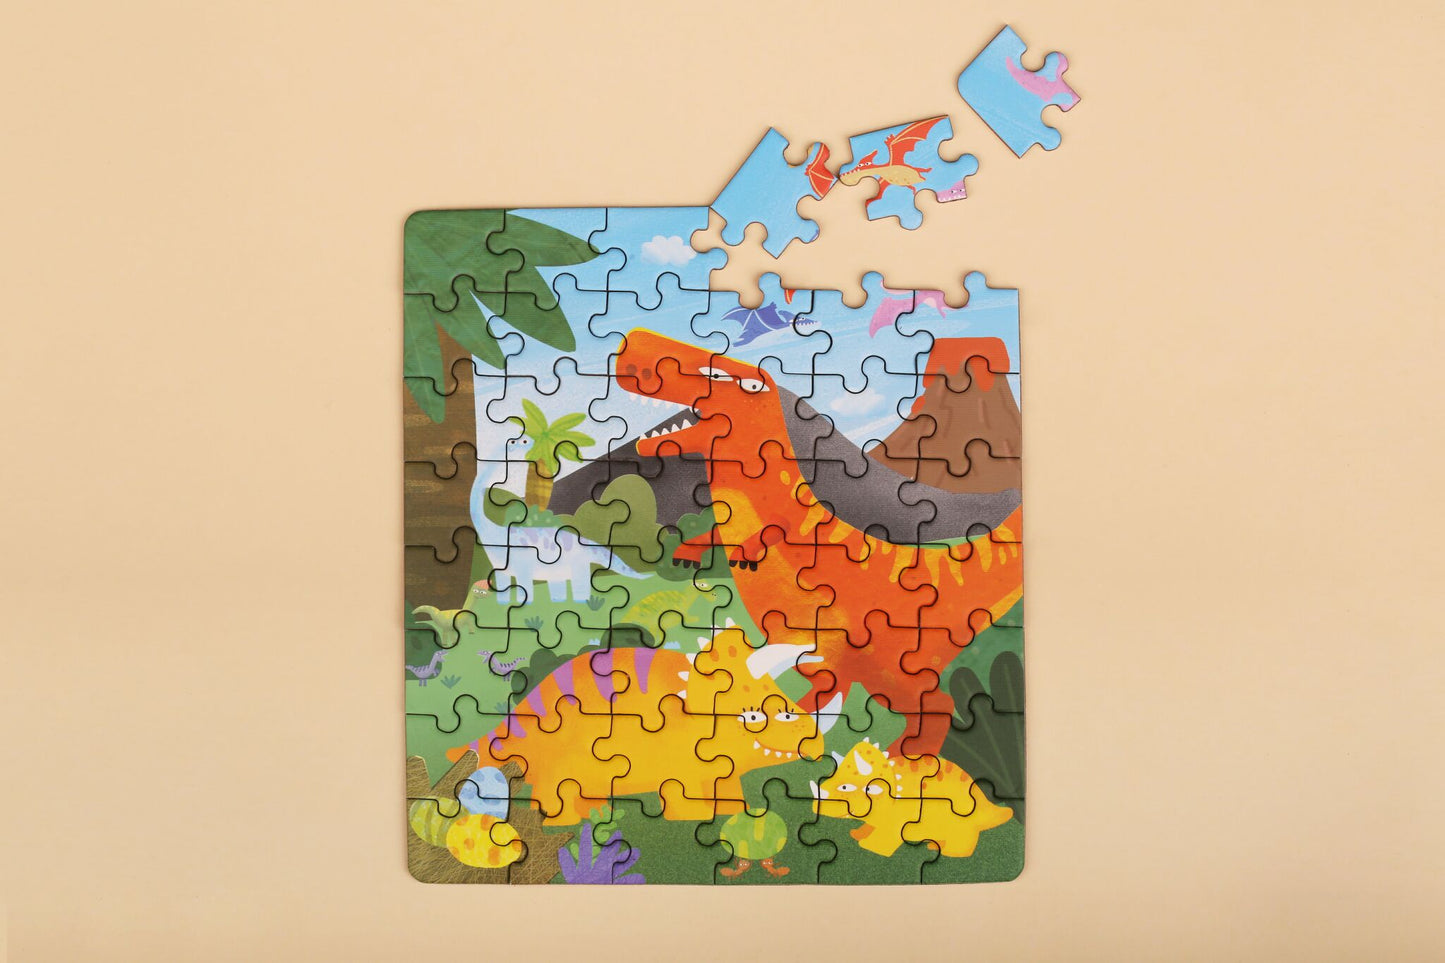 2 in 1 Magnetic Puzzles - Dinosaurs